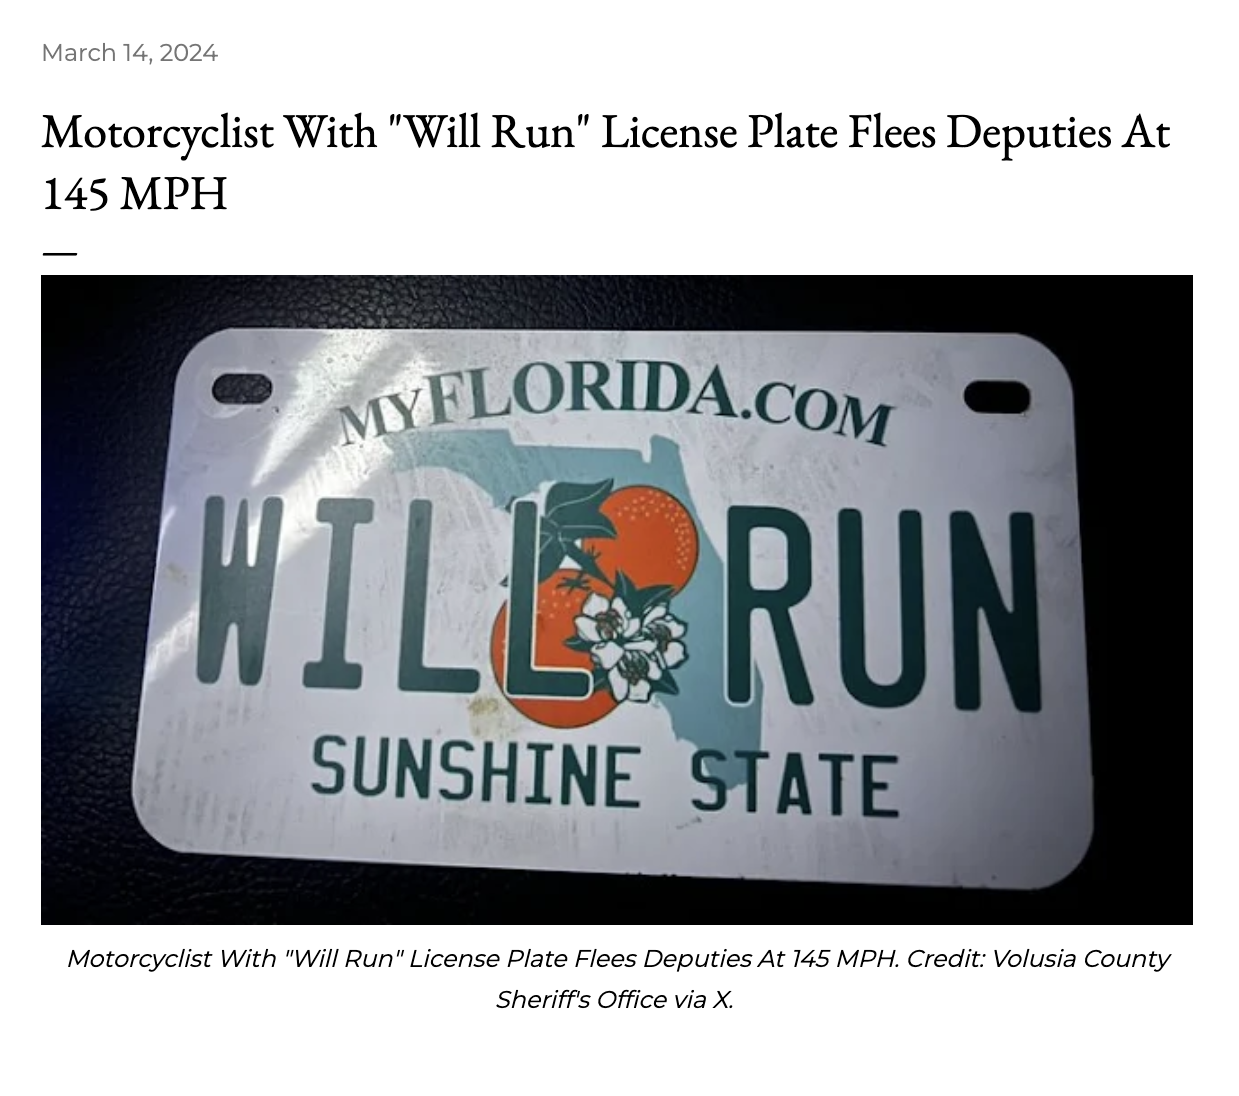 label - Motorcyclist With "Will Run" License Plate Flees Deputies At 145 Mph Myflorida.Com Will Run Sunshine State Motorcyclist With "Will Run" License Plate Flees Deputies At 145 Mph. Credit Volusia County Sheriff's Office via X.